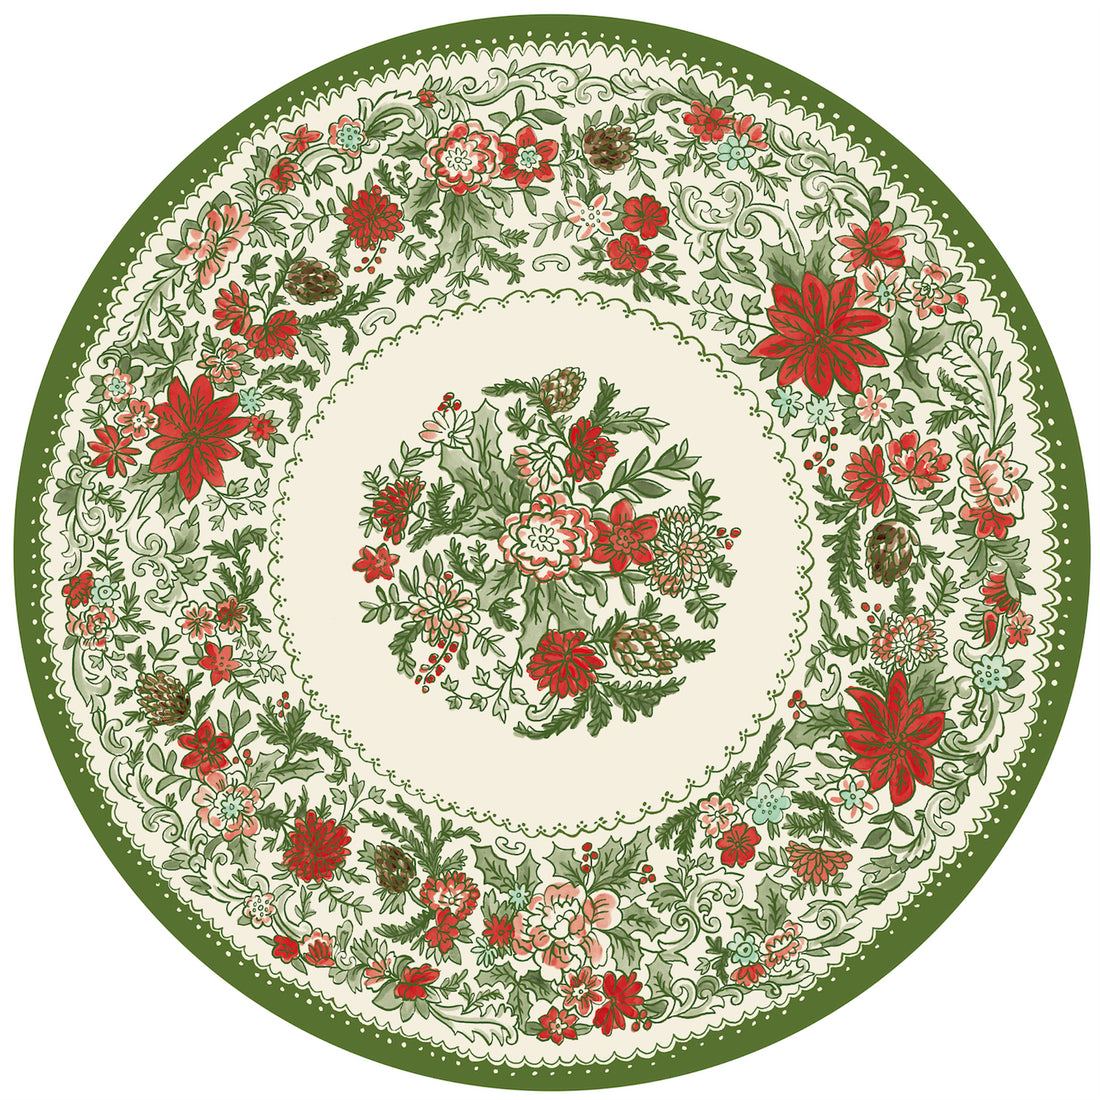 A circular illustration resembling vintage china featuring red poinsettias and green floral filagree, contained by a decorative green border on a white background. 